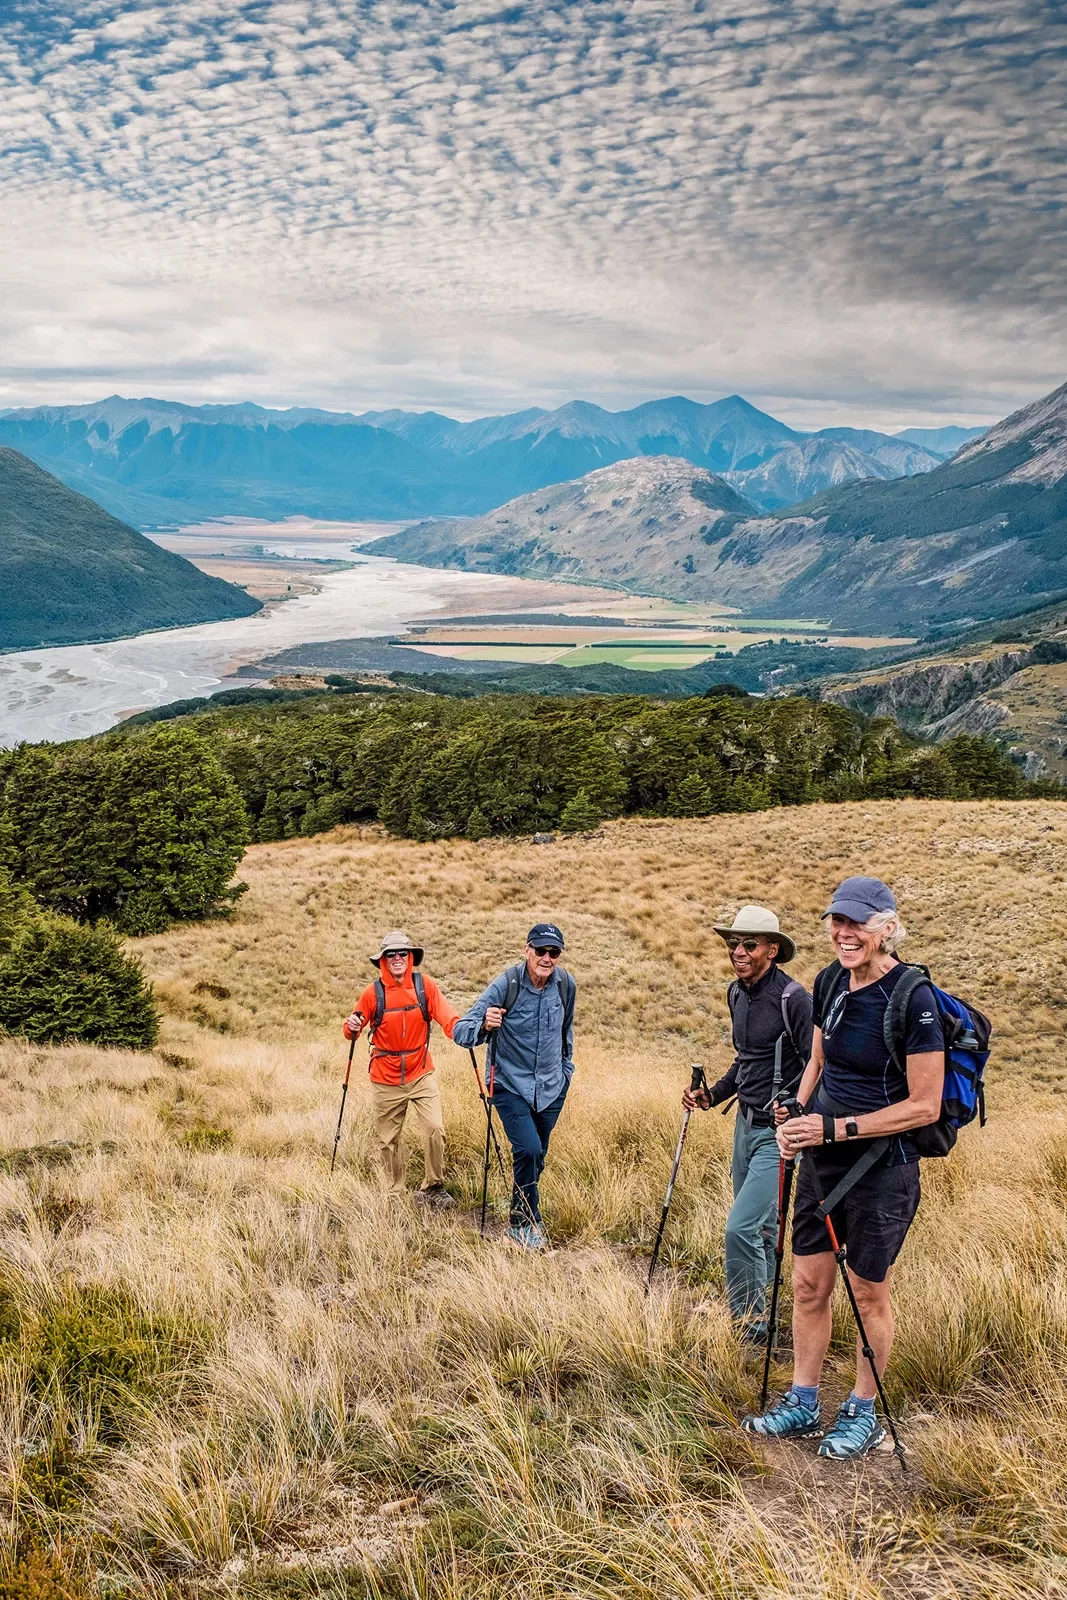 Hiking through a field in New Zealand